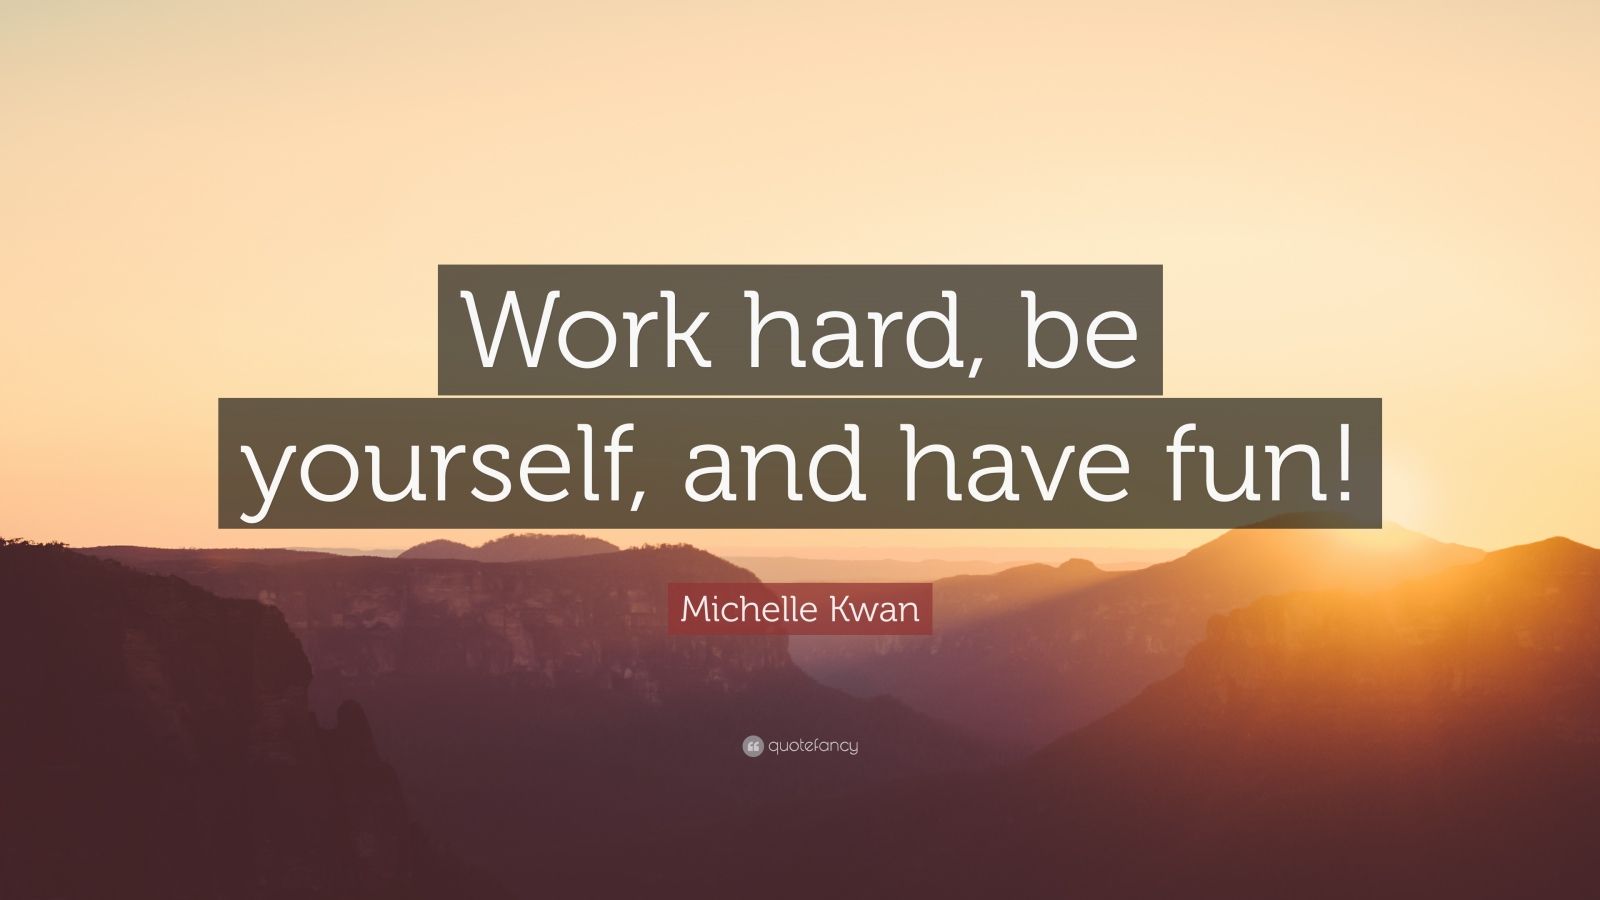 Michelle Kwan Quote: “Work hard, be yourself, and have fun!” (12